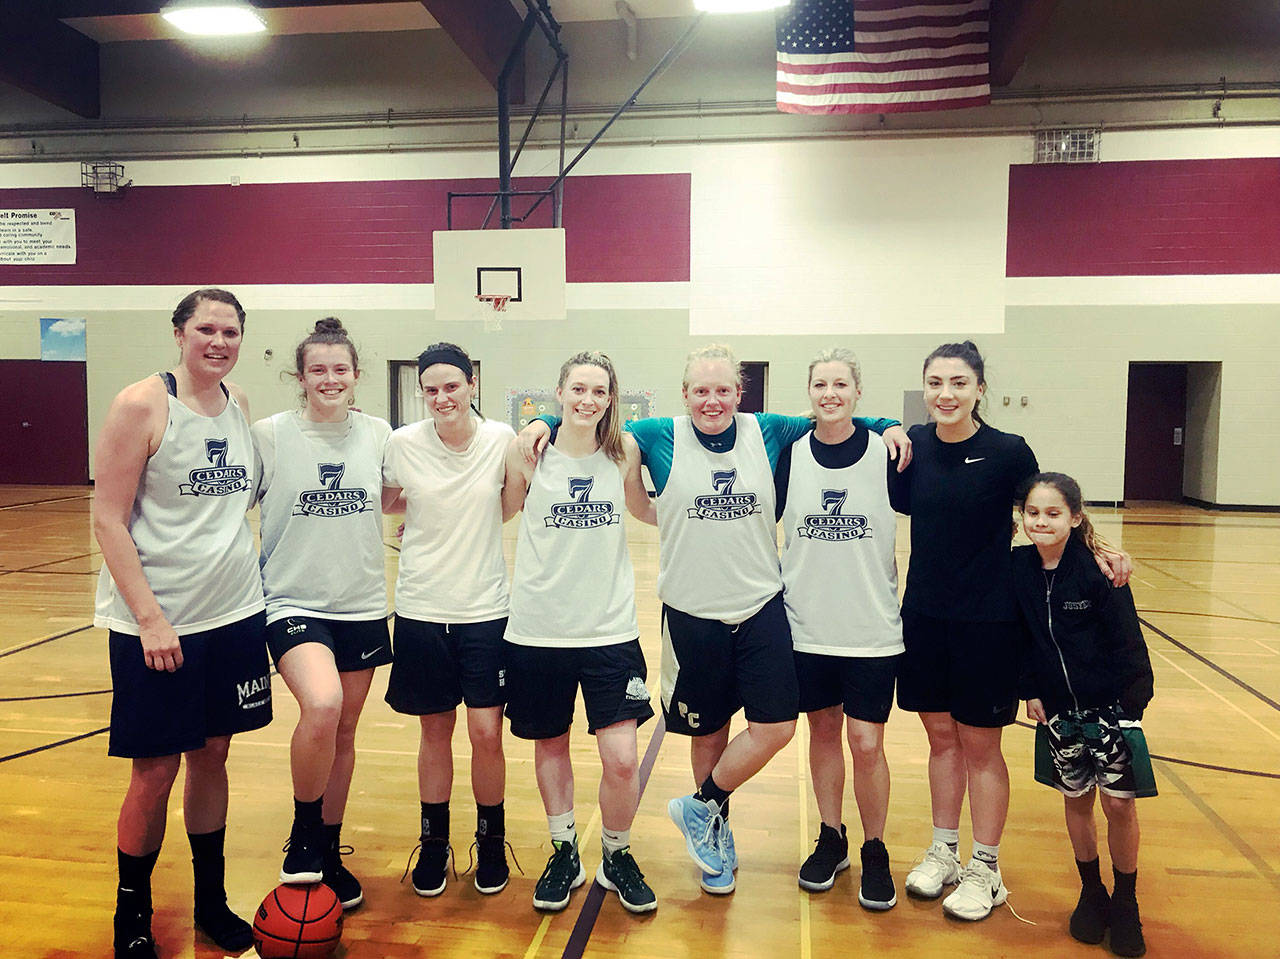 7 Cedars Casino won the Port Angeles Parks and Recreation Women’s City League Basketball Championship after beating Elwha Fire and Ice 2-1 in a three-game series. Team members are, from left, Bracey Ulin, Jaida Wood, Alexa Justus, Jessica Madison, Alison Crumb and Ashley Payne. Cierra and Kaylee Moss also are pictured.